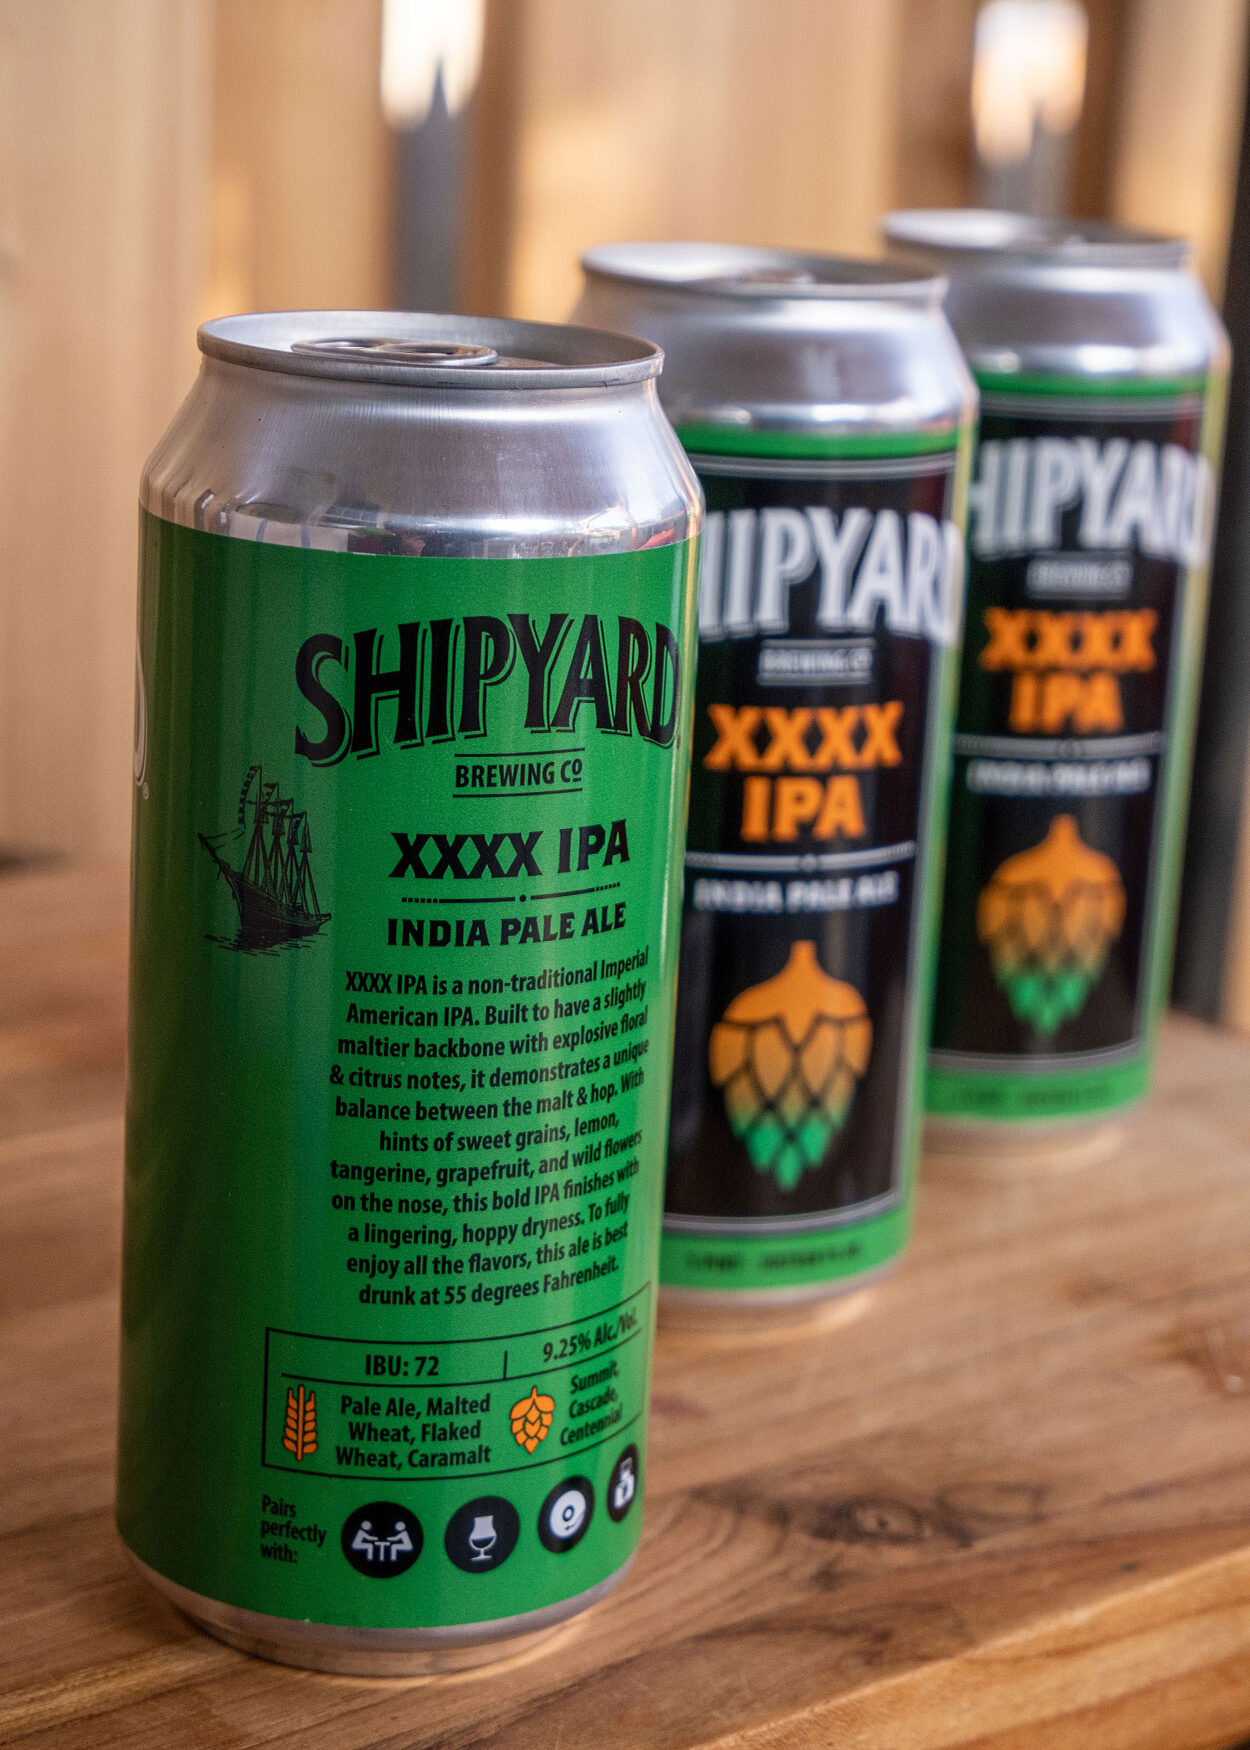 NEW SHIPYARD IPA XXXX BEER TAP HANDLE INDIA PALE ALE 